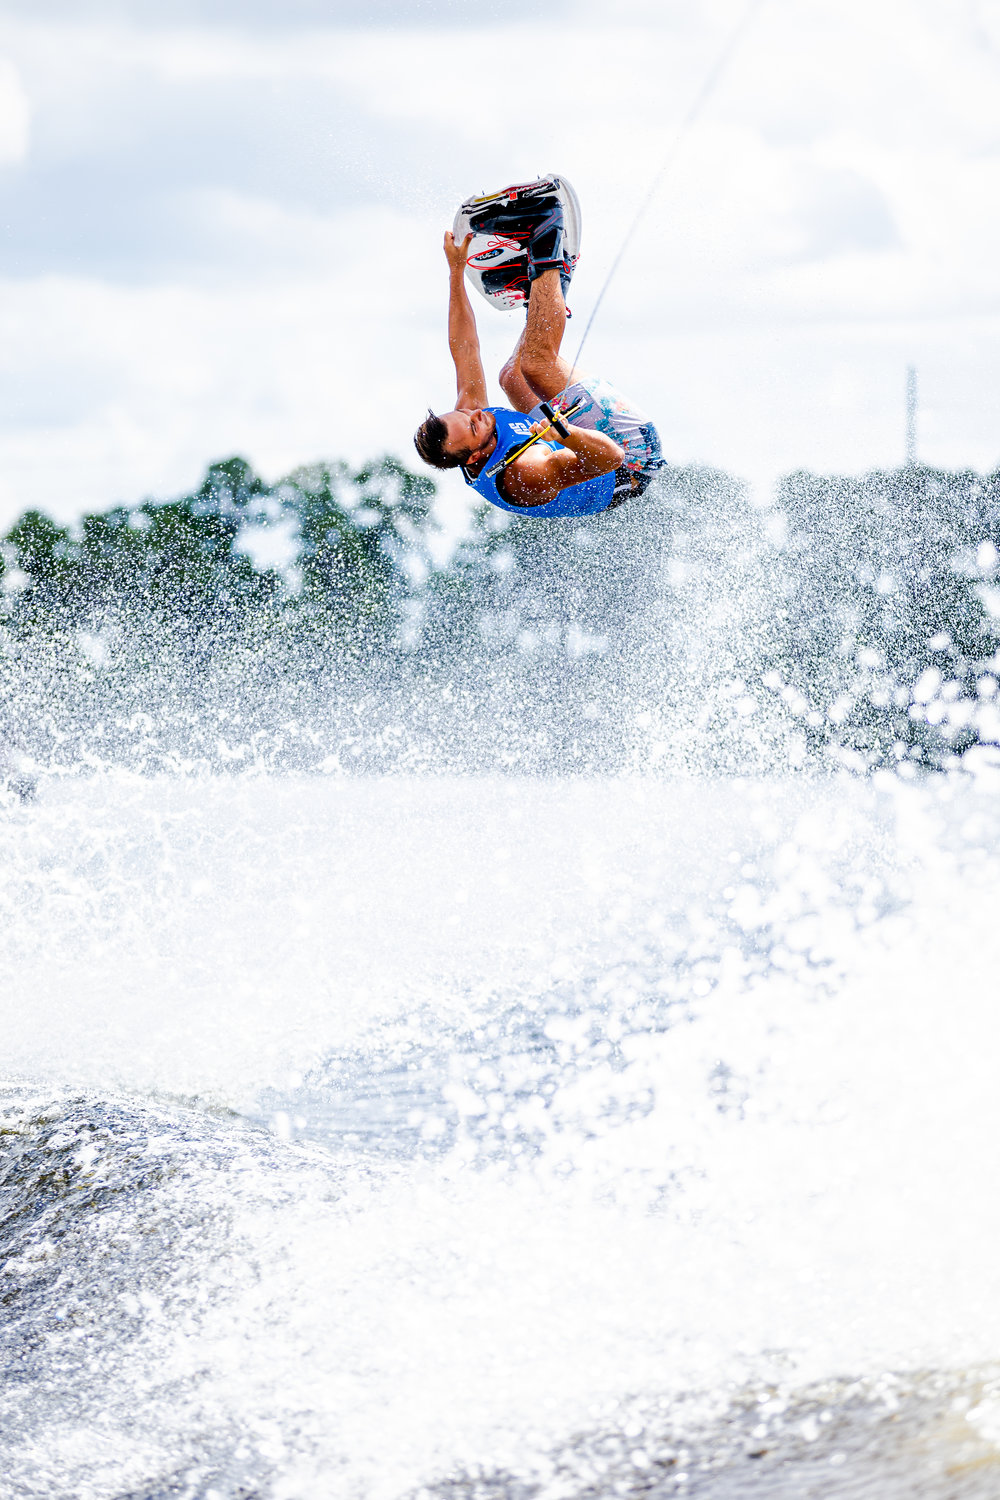 Some of the world’s most talented wakeboarders and wakesurfers come to Katy on Saturday, June 12, to compete at the Pro Wakeboard, Pro Wakesurf and Junior Pro Wakeboard tours. The circuit will take place on August Lakes, Katy’s 100-plus acre watersports community facility located at 3707 Pitts Road.